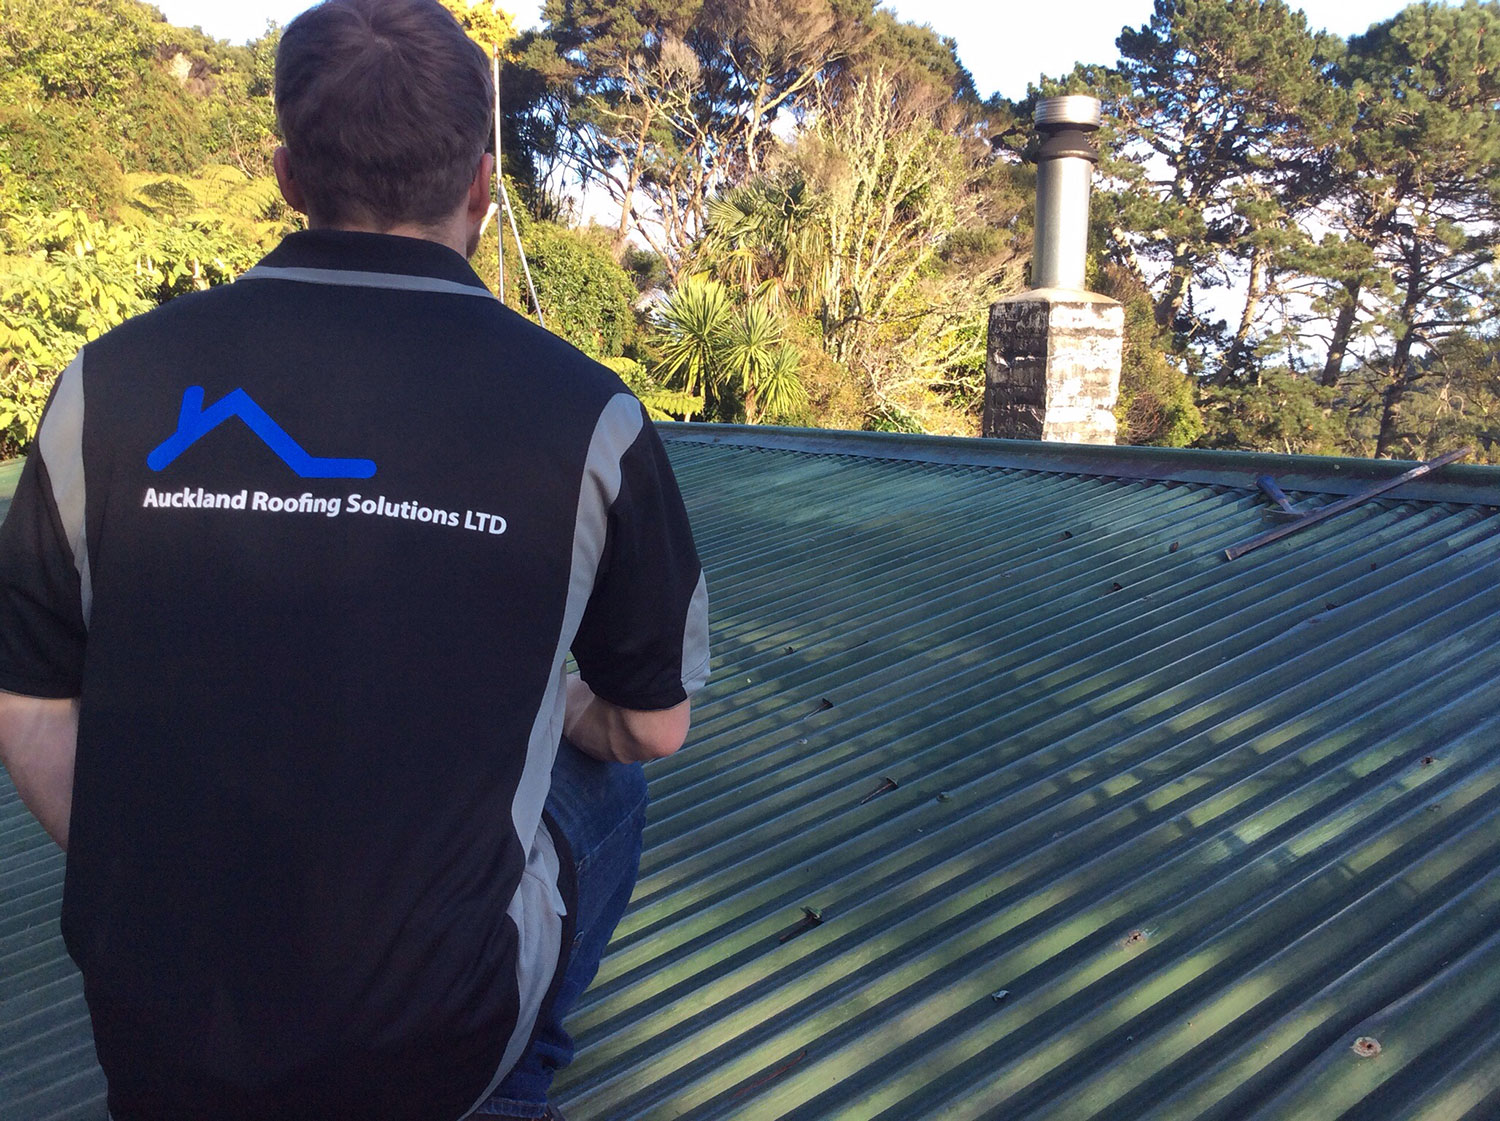 auckland roofing solutions services auckland and new zealand wide new roofs repair cladding and more Project gallery 35